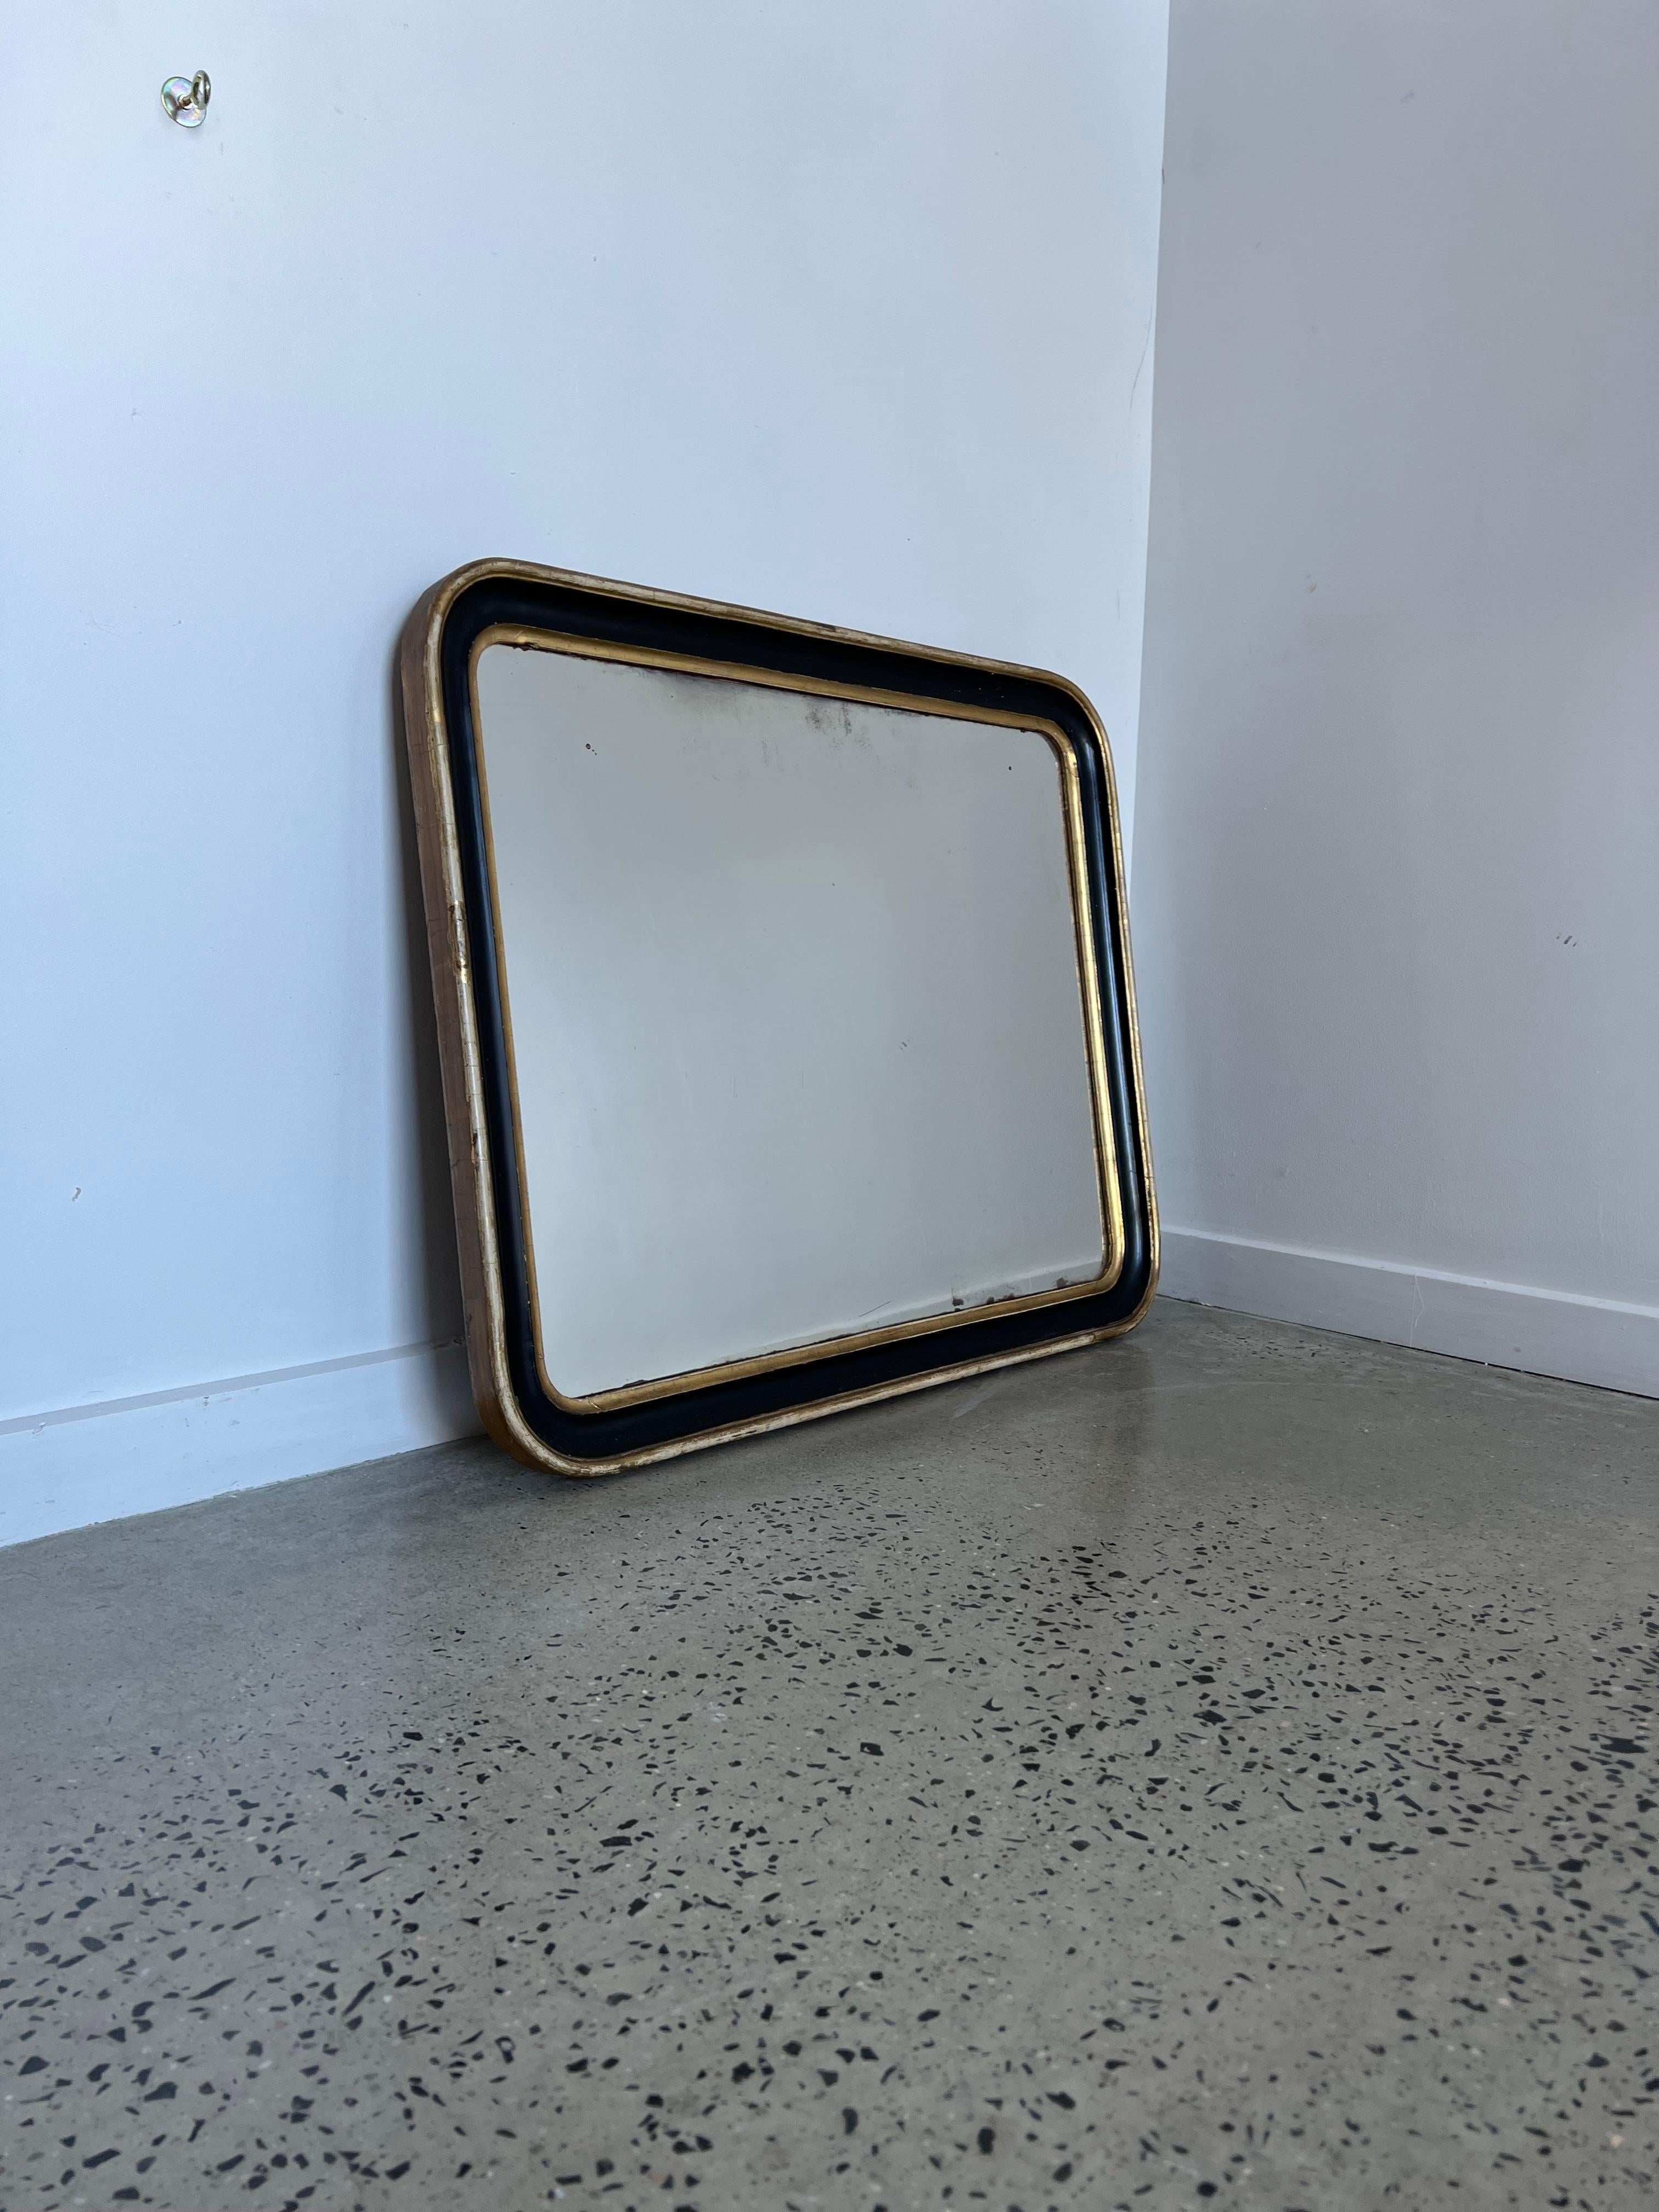 1940s Italian Mid-Century Modern gold leaf wood mirror.
Beautiful rectangular mirror, the frame is painted in black and gold leaf technique along the edges.
 